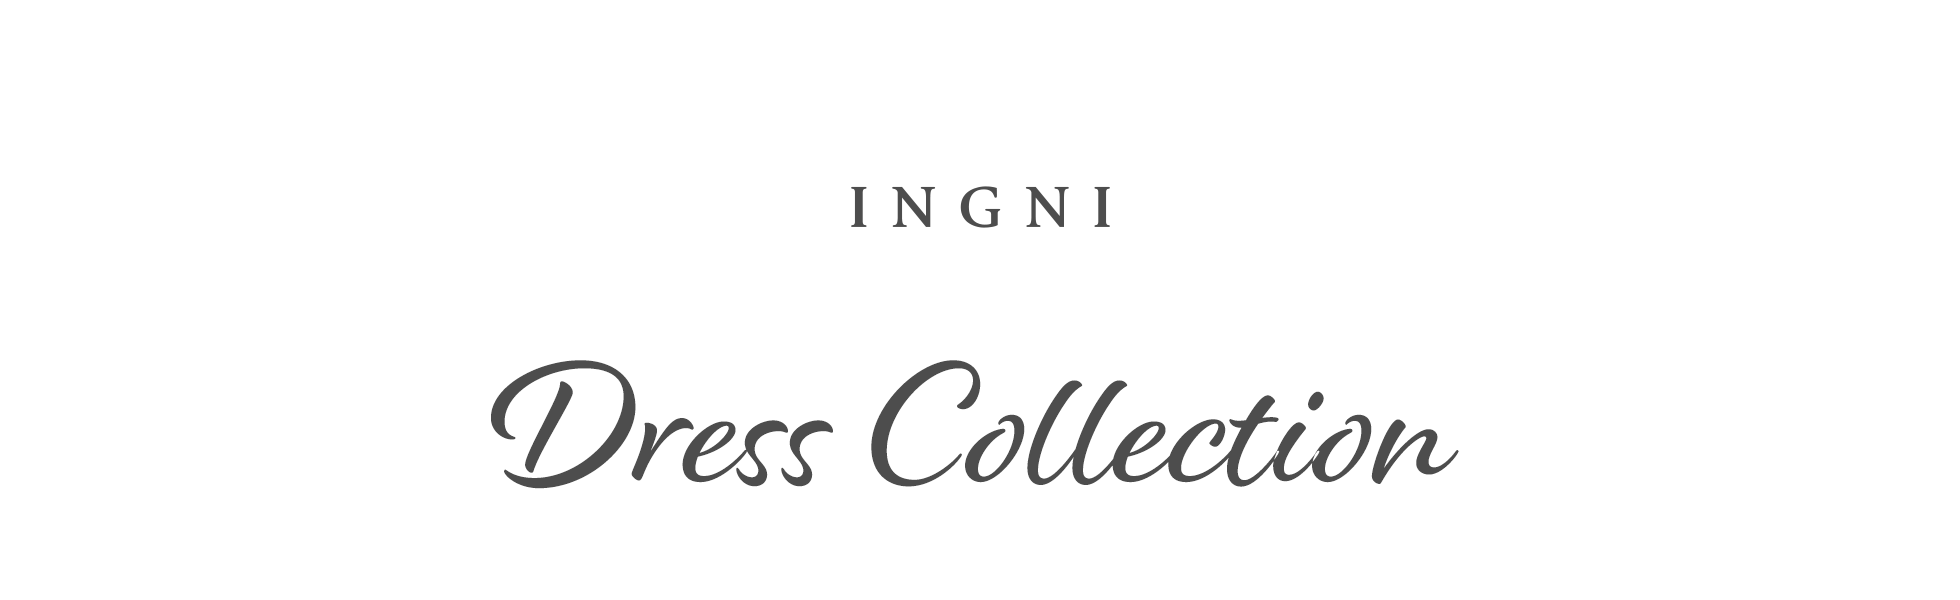 INGNI Dress Collection